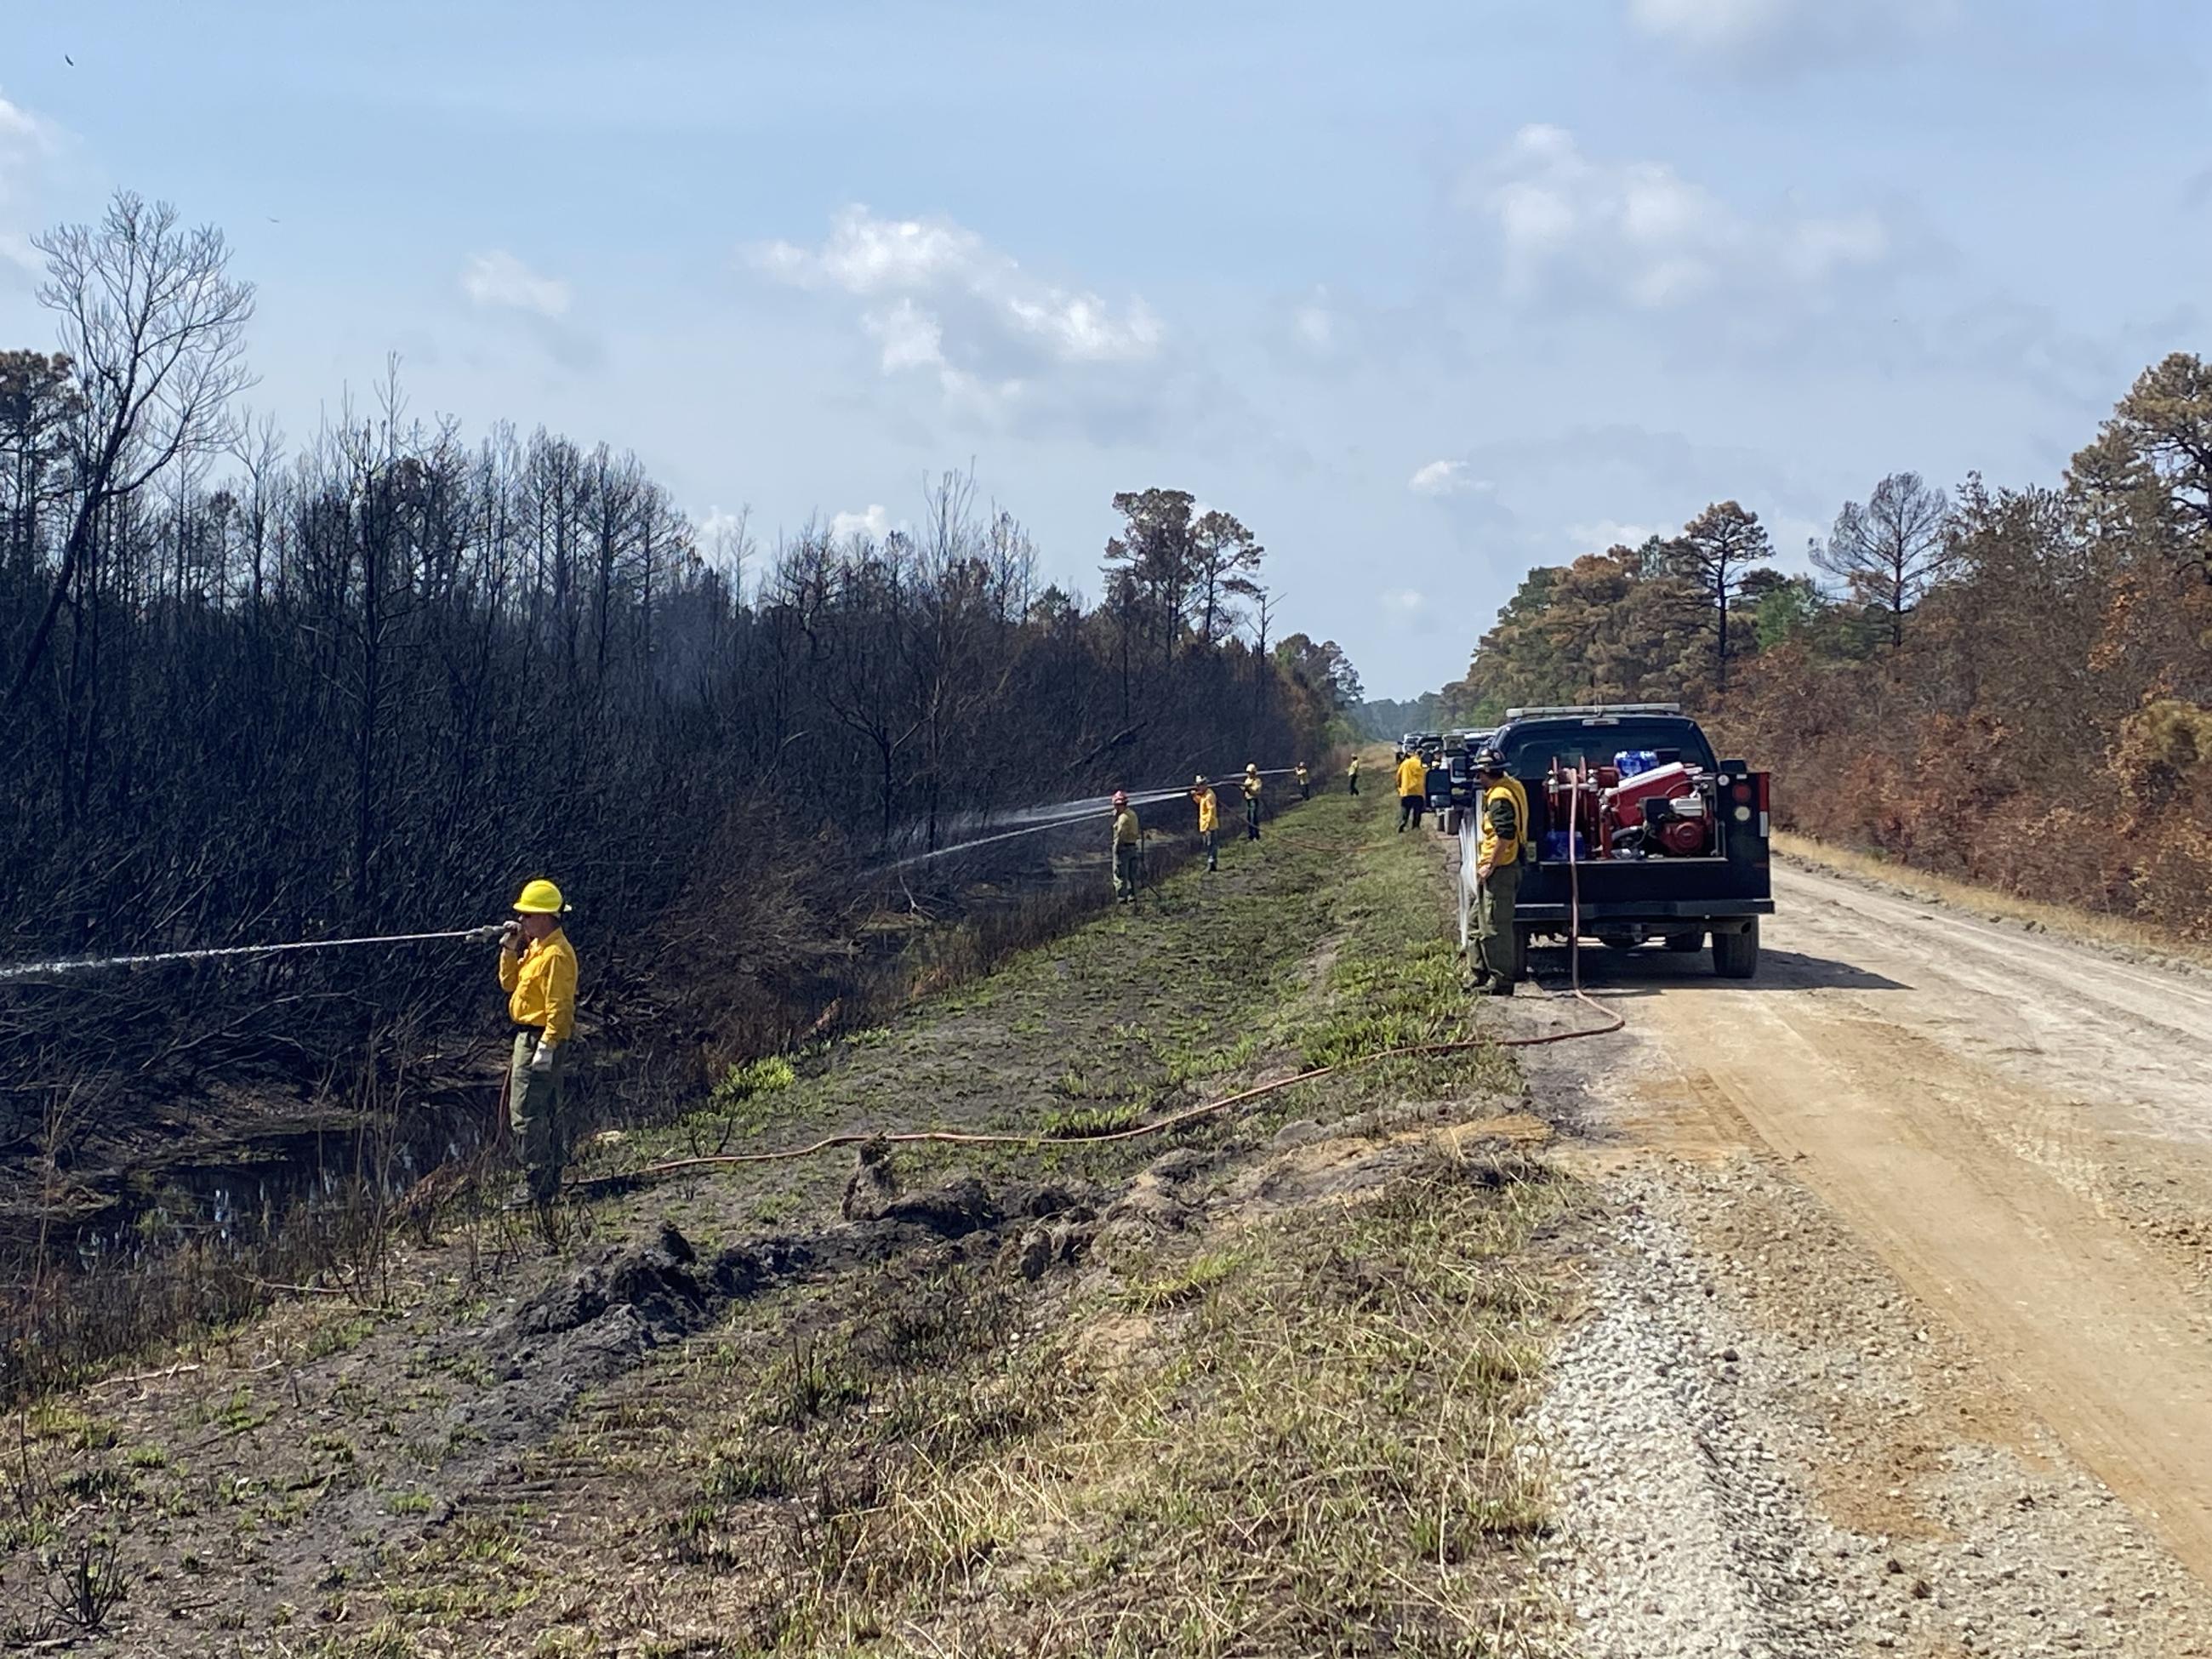 Engine Strike Team conducts mop-up operations on the Great Lakes Fire on April 29, 2023. Several engines line the roadways and firefighters man hose to spray burned areas with water.